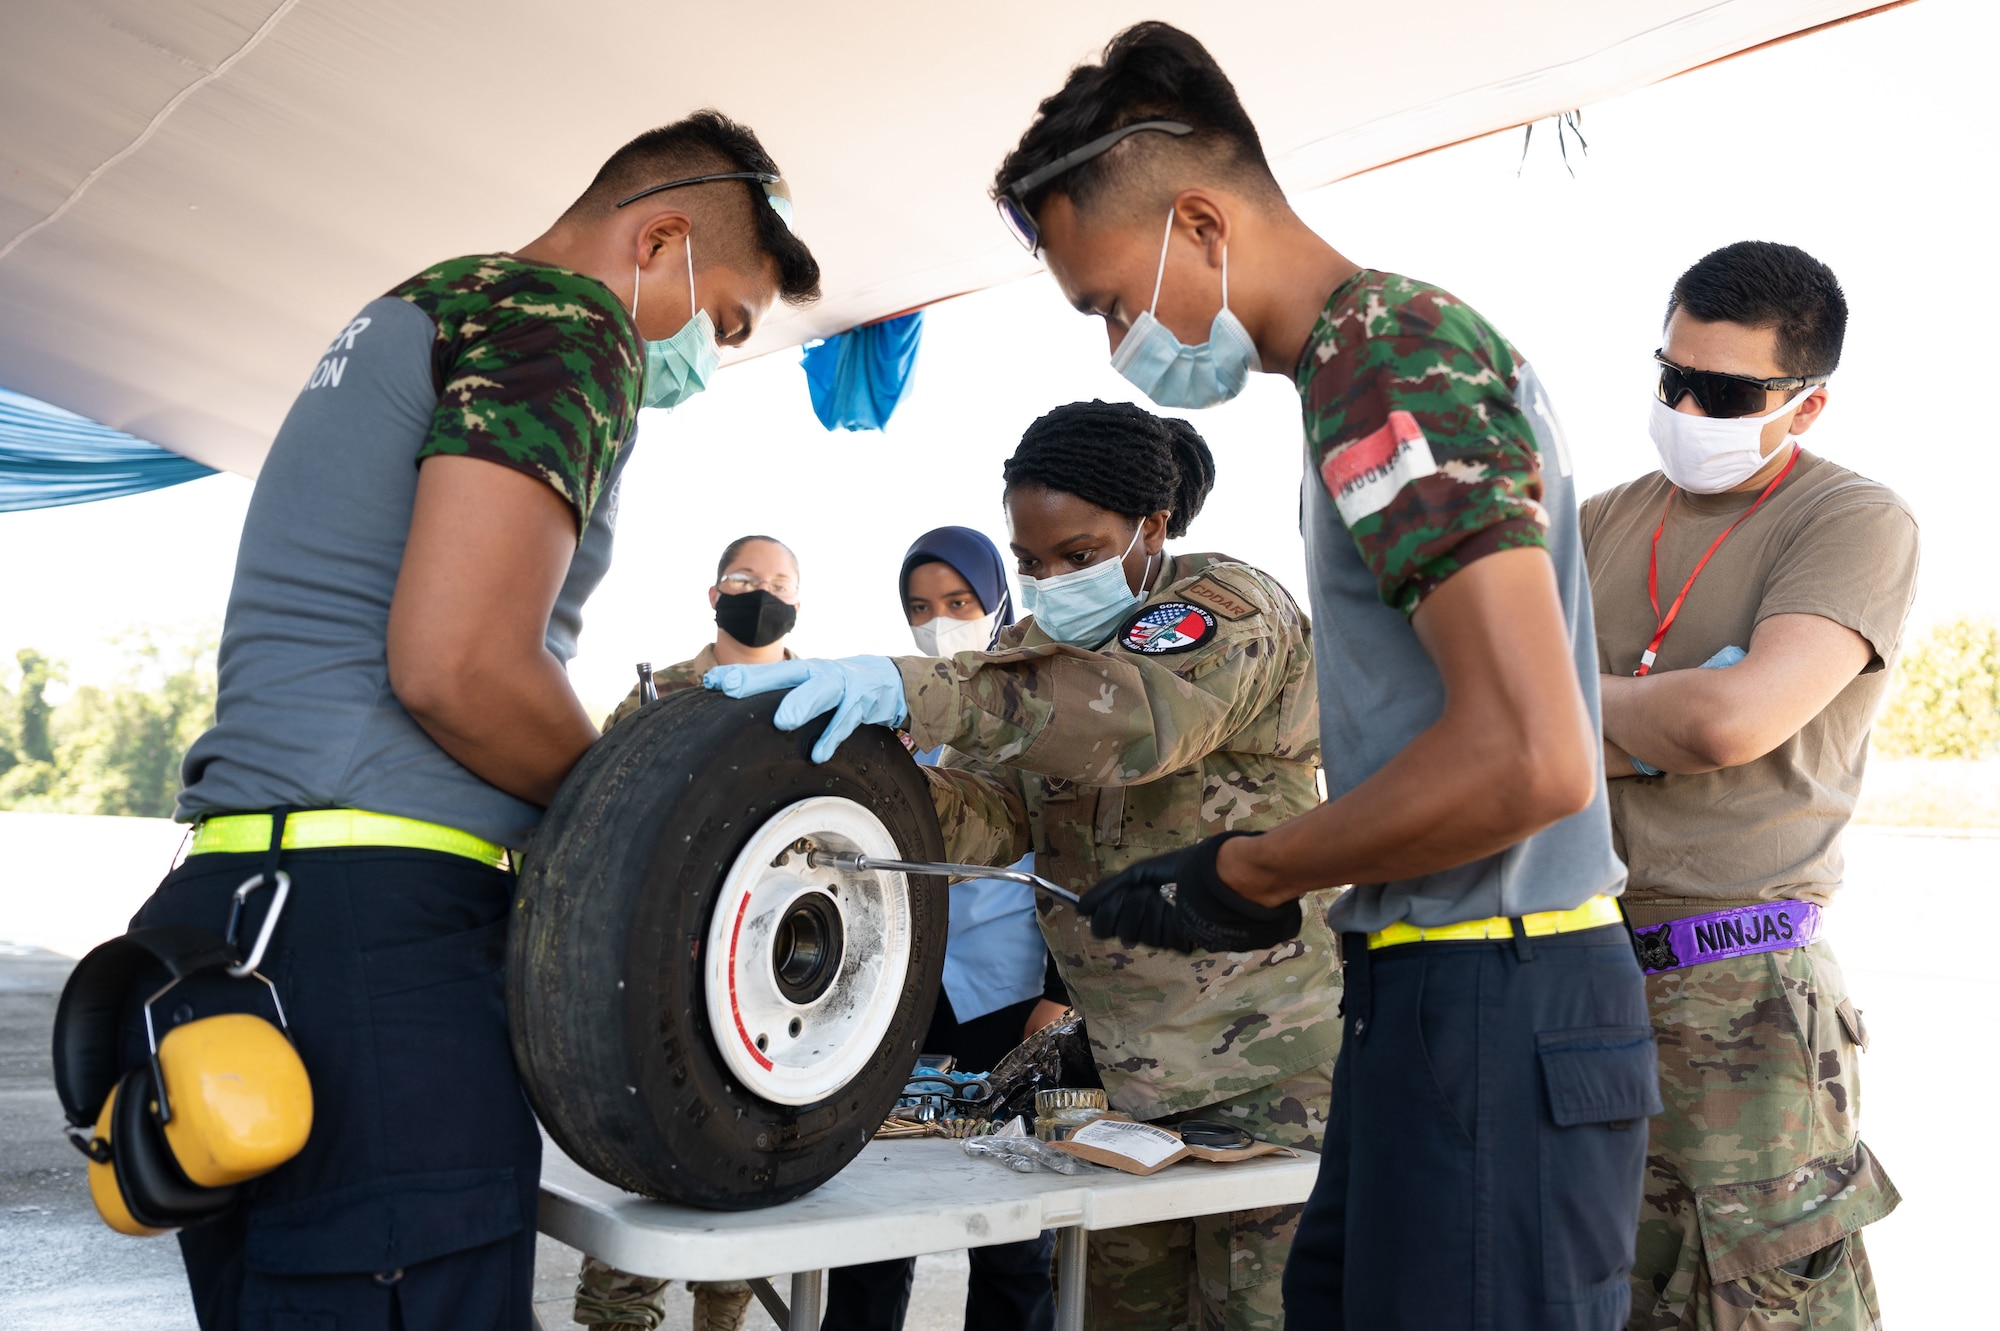 Indonesian Air Force 2nd Sergeants Rajas Febry, and Didit Dwe perform wheel and tire maintenance with U.S. Air Force Staff Sgt. Za'Queta Eddins, 35th Maintenance Group Transient Alert noncommissioned officer in charge, during Cope West 21 at Roesmin Nurjadin Air Force Base in Pekanbaru, Riau, Indonesia. June 23, 2021. U.S. Airmen worked together with the Indonesian Air Force in the air and on the ground to facilitate subject-matter expert exchanges strengthening our interoperability. (U.S. Air Force photo by Staff Sgt. Matthew Kakaris)